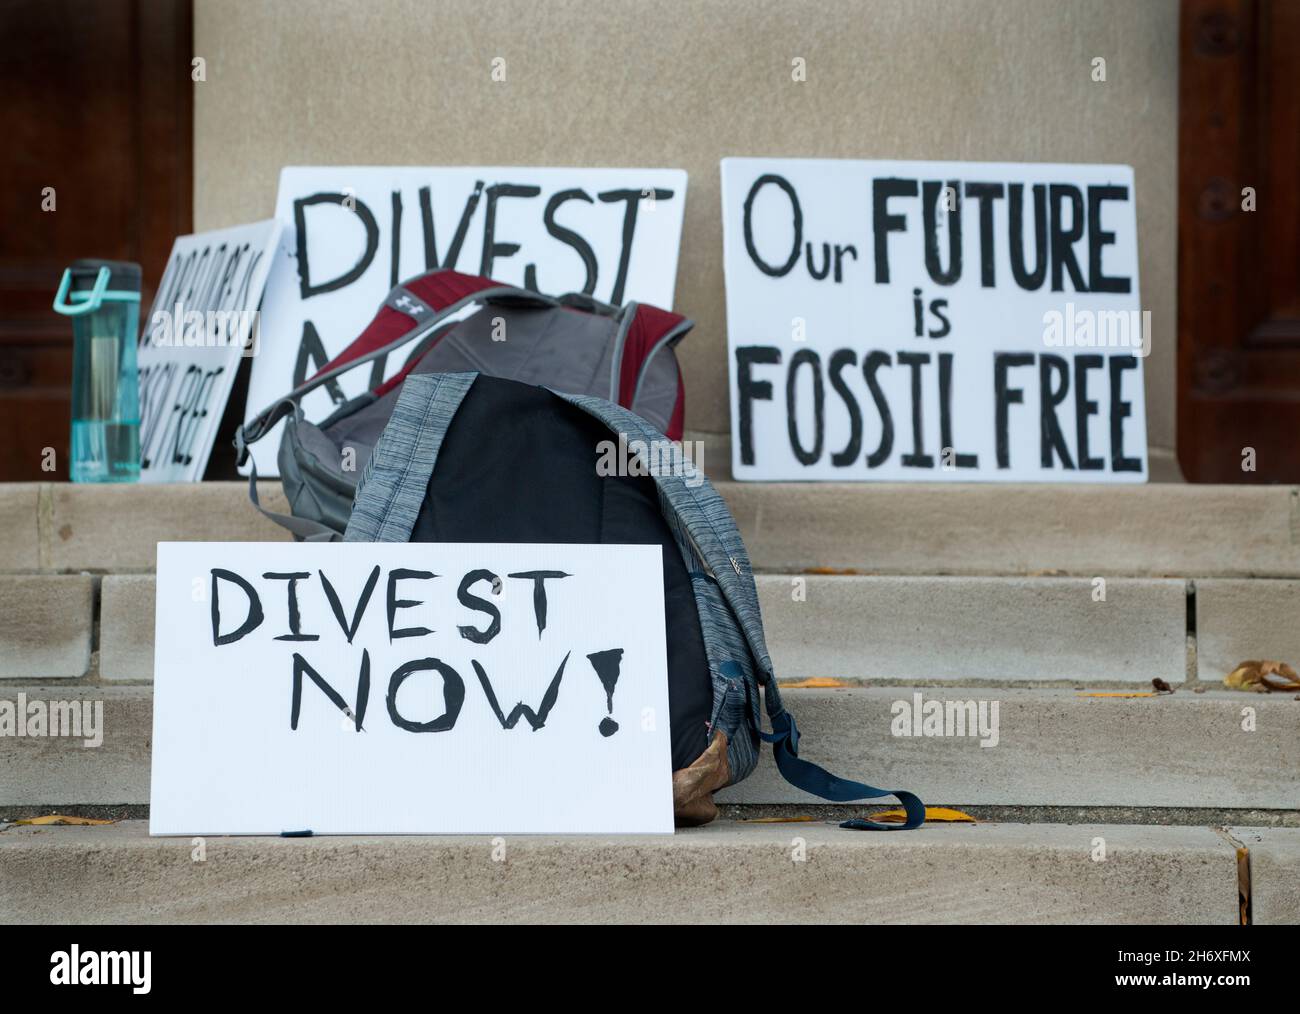 Divestment Day of Action, 16 Nov. 2021. Massachusetts Institute of Technology (MIT). About 50 students and faculty gathered on the steps of the MIT Walker Memorial Building and marched through the MIT campus in Cambridge, MA, to the Student Center to protest MIT’s endowment investing in fossil fuel companies. Stock Photo